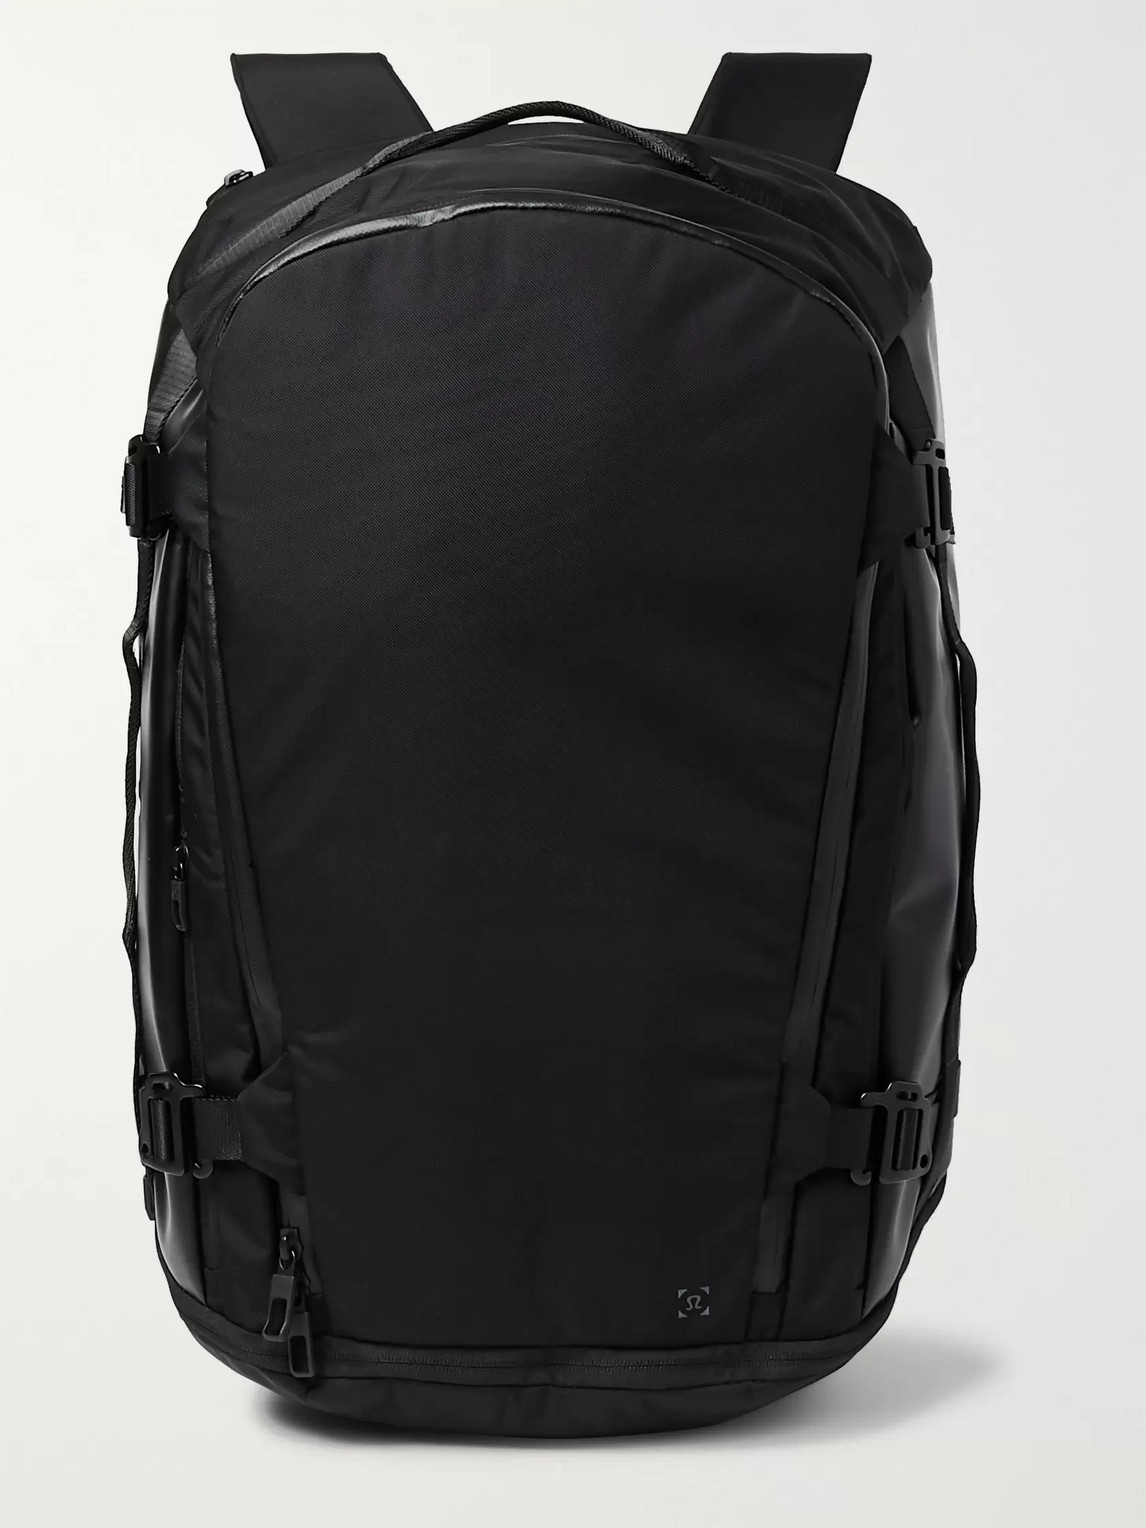 Lululemon More Miles Convertible Canvas And Nylon Backpack In Black